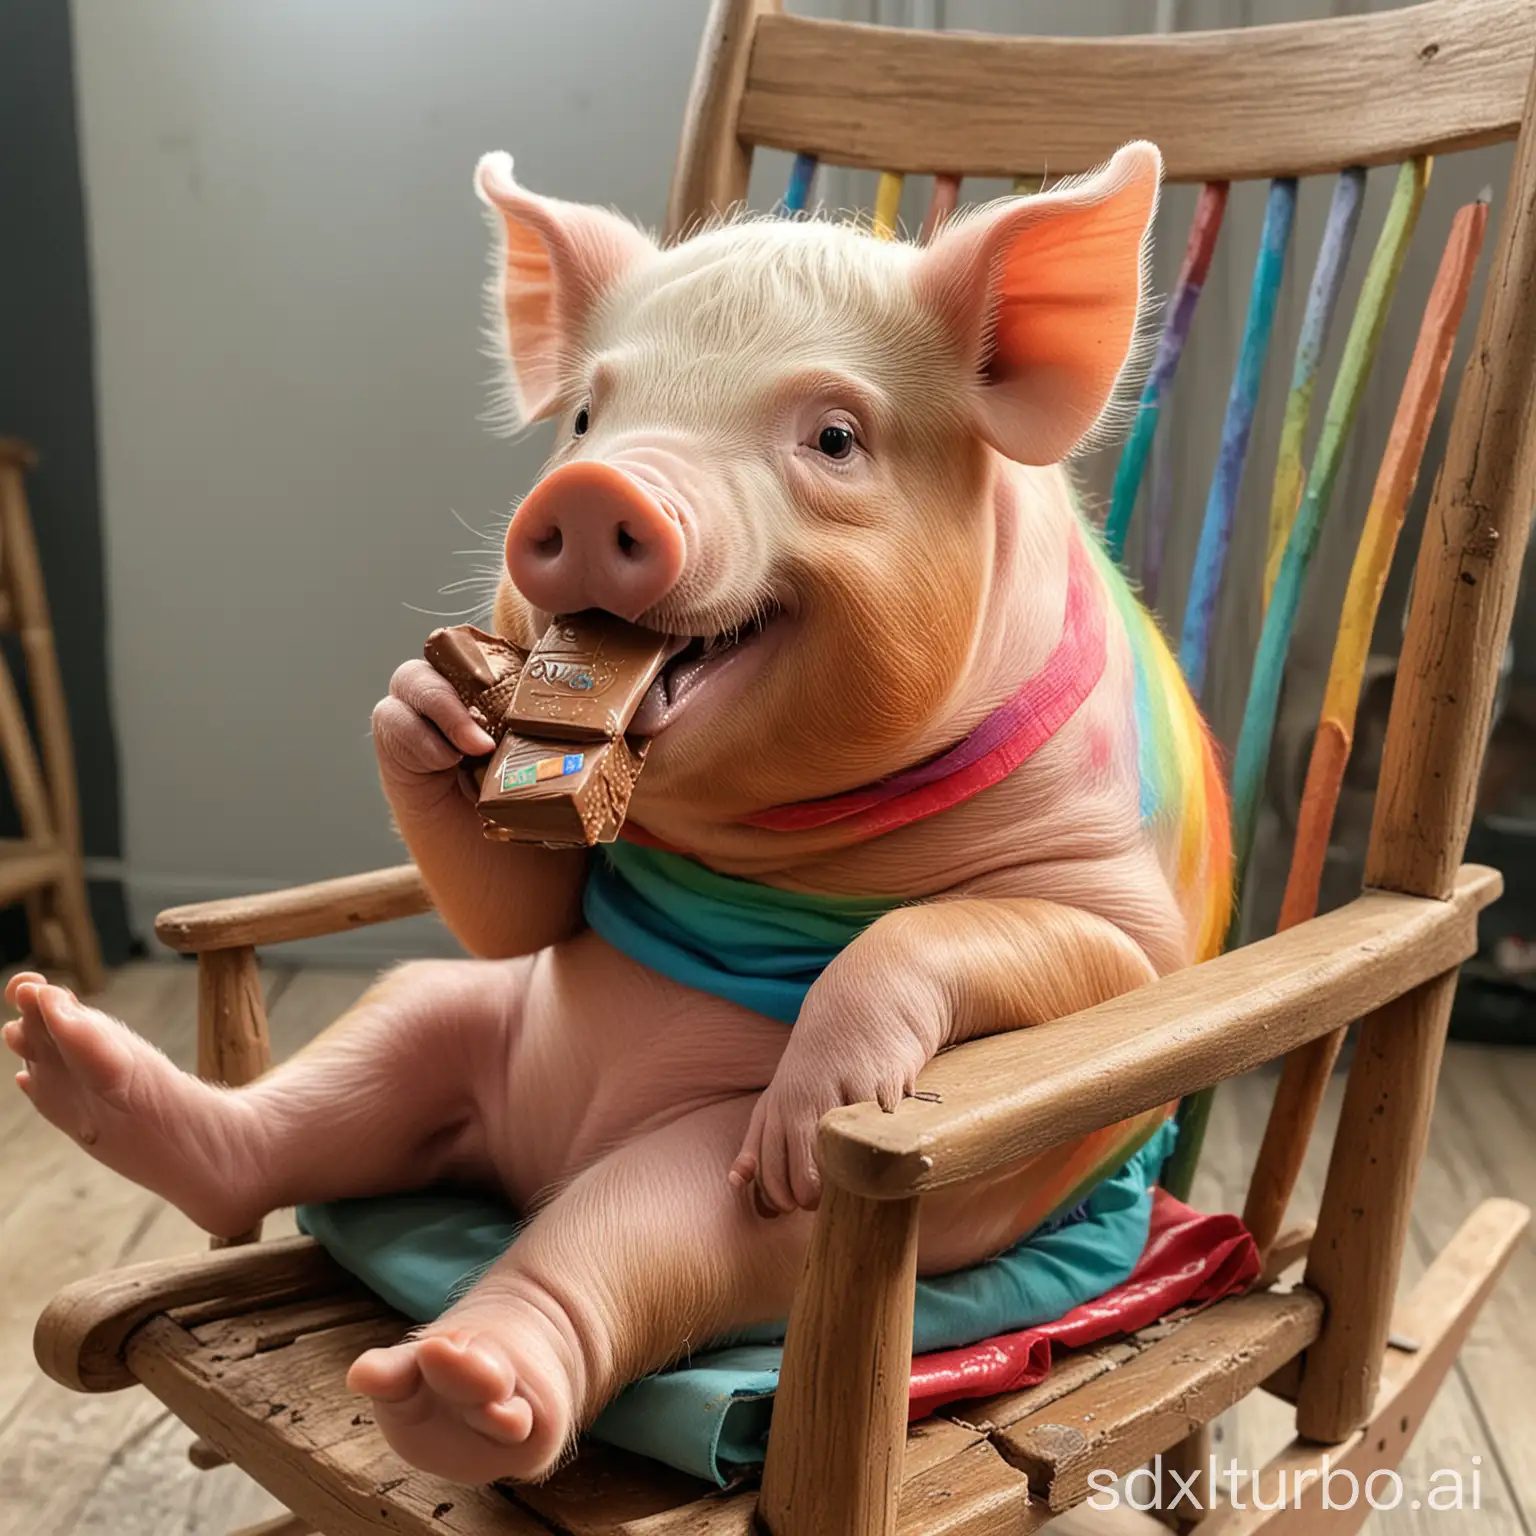 Colorful-Pig-Enjoying-Chocolate-in-a-Rocking-Chair